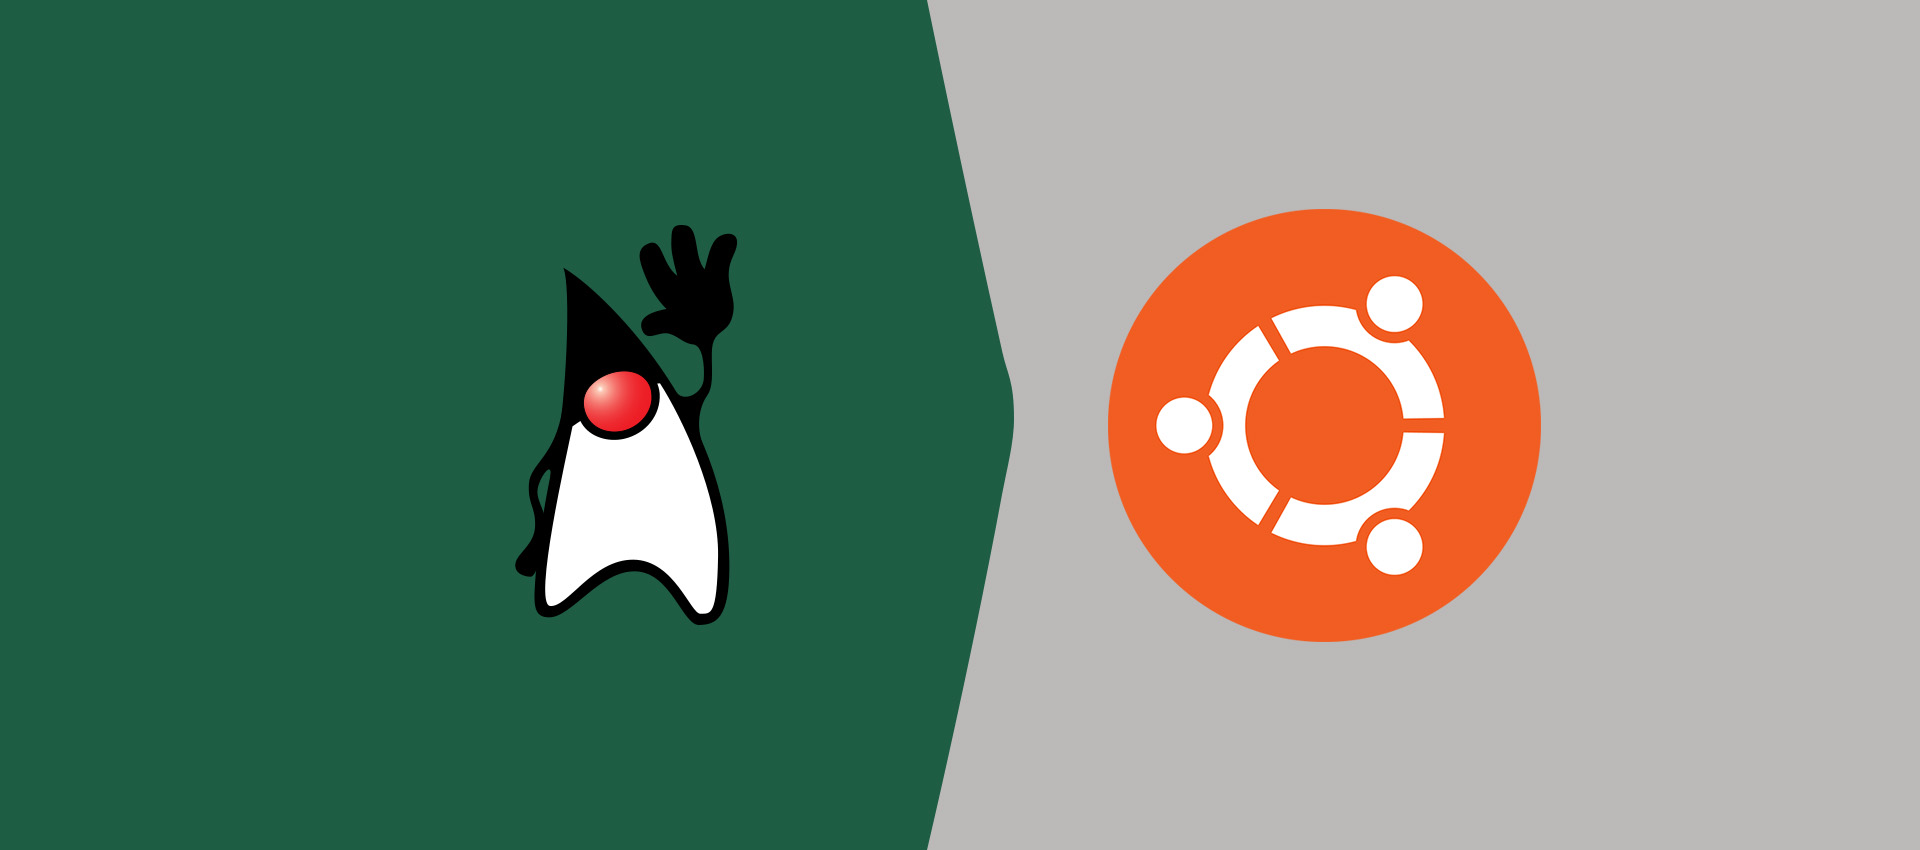 How To Install OpenJDK 17 On Ubuntu 20.04 LTS